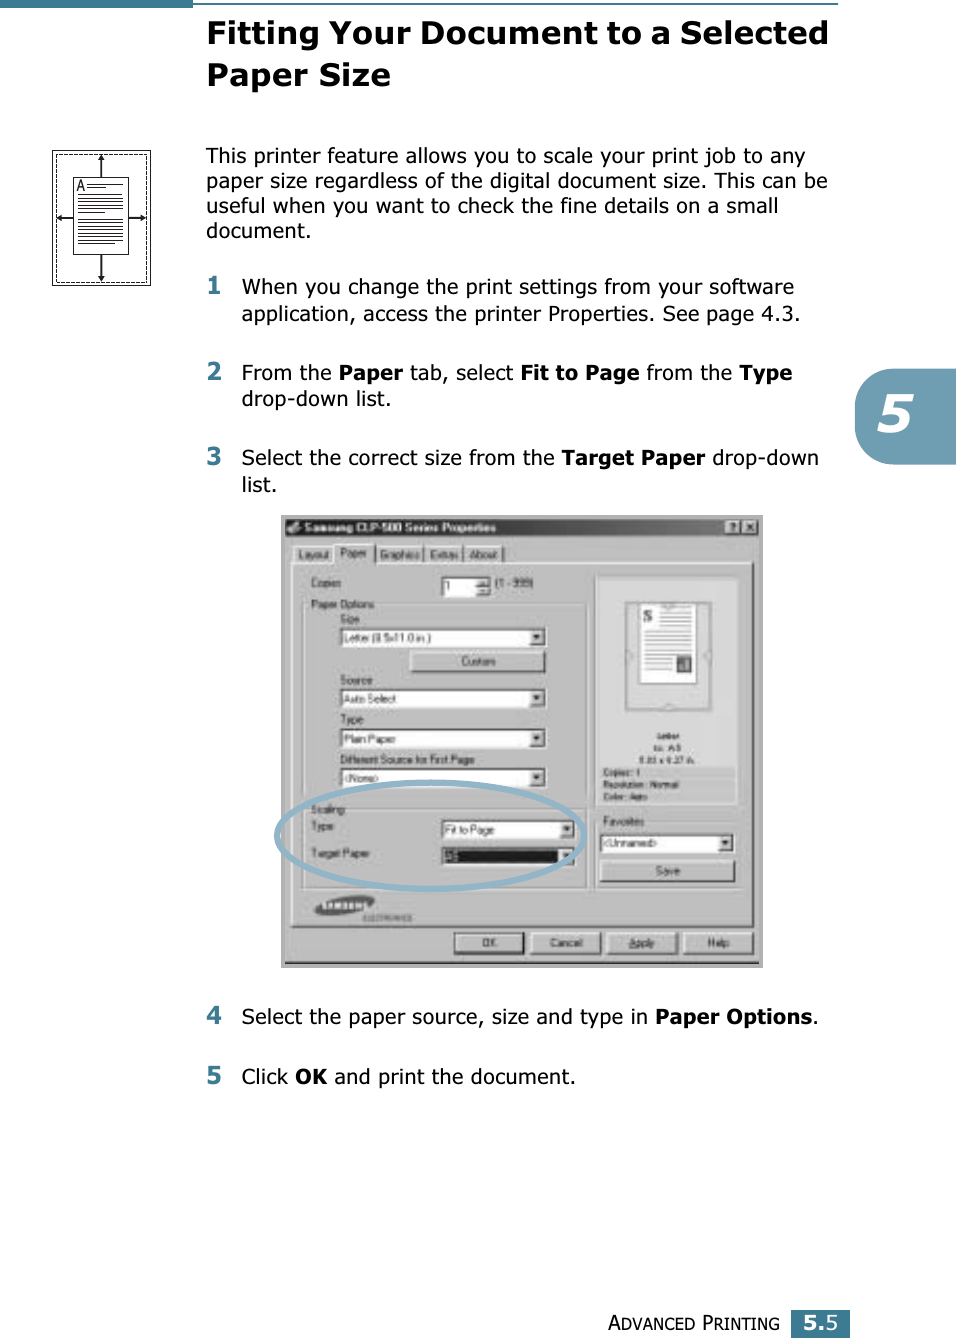 ADVANCED PRINTING5.55Fitting Your Document to a Selected Paper SizeThis printer feature allows you to scale your print job to any paper size regardless of the digital document size. This can be useful when you want to check the fine details on a small document. 1When you change the print settings from your software application, access the printer Properties. See page 4.3.2From the Paper tab, select Fit to Page from the Type drop-down list. 3Select the correct size from the Target Paper drop-down list.4Select the paper source, size and type in Paper Options.5Click OK and print the document. A